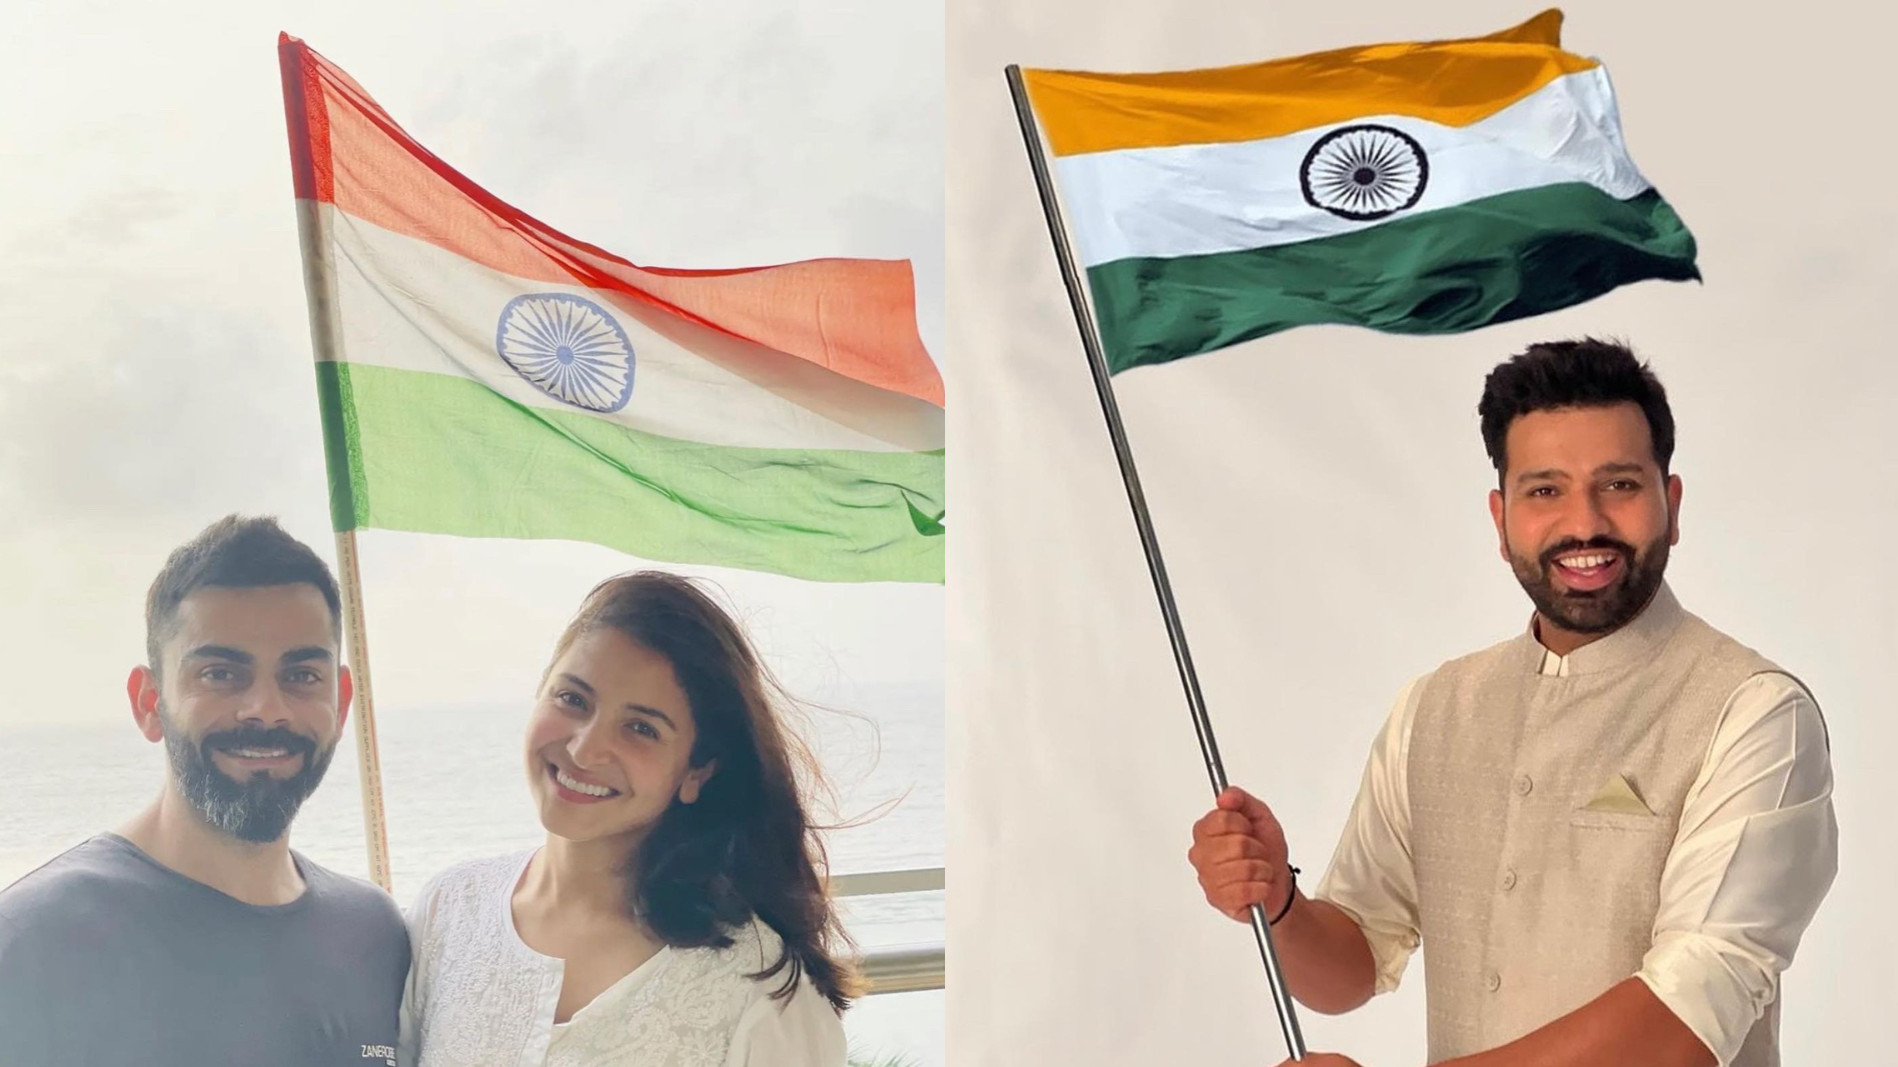 Indian team shares their joy and pride as India celebrates 75 years of Independence